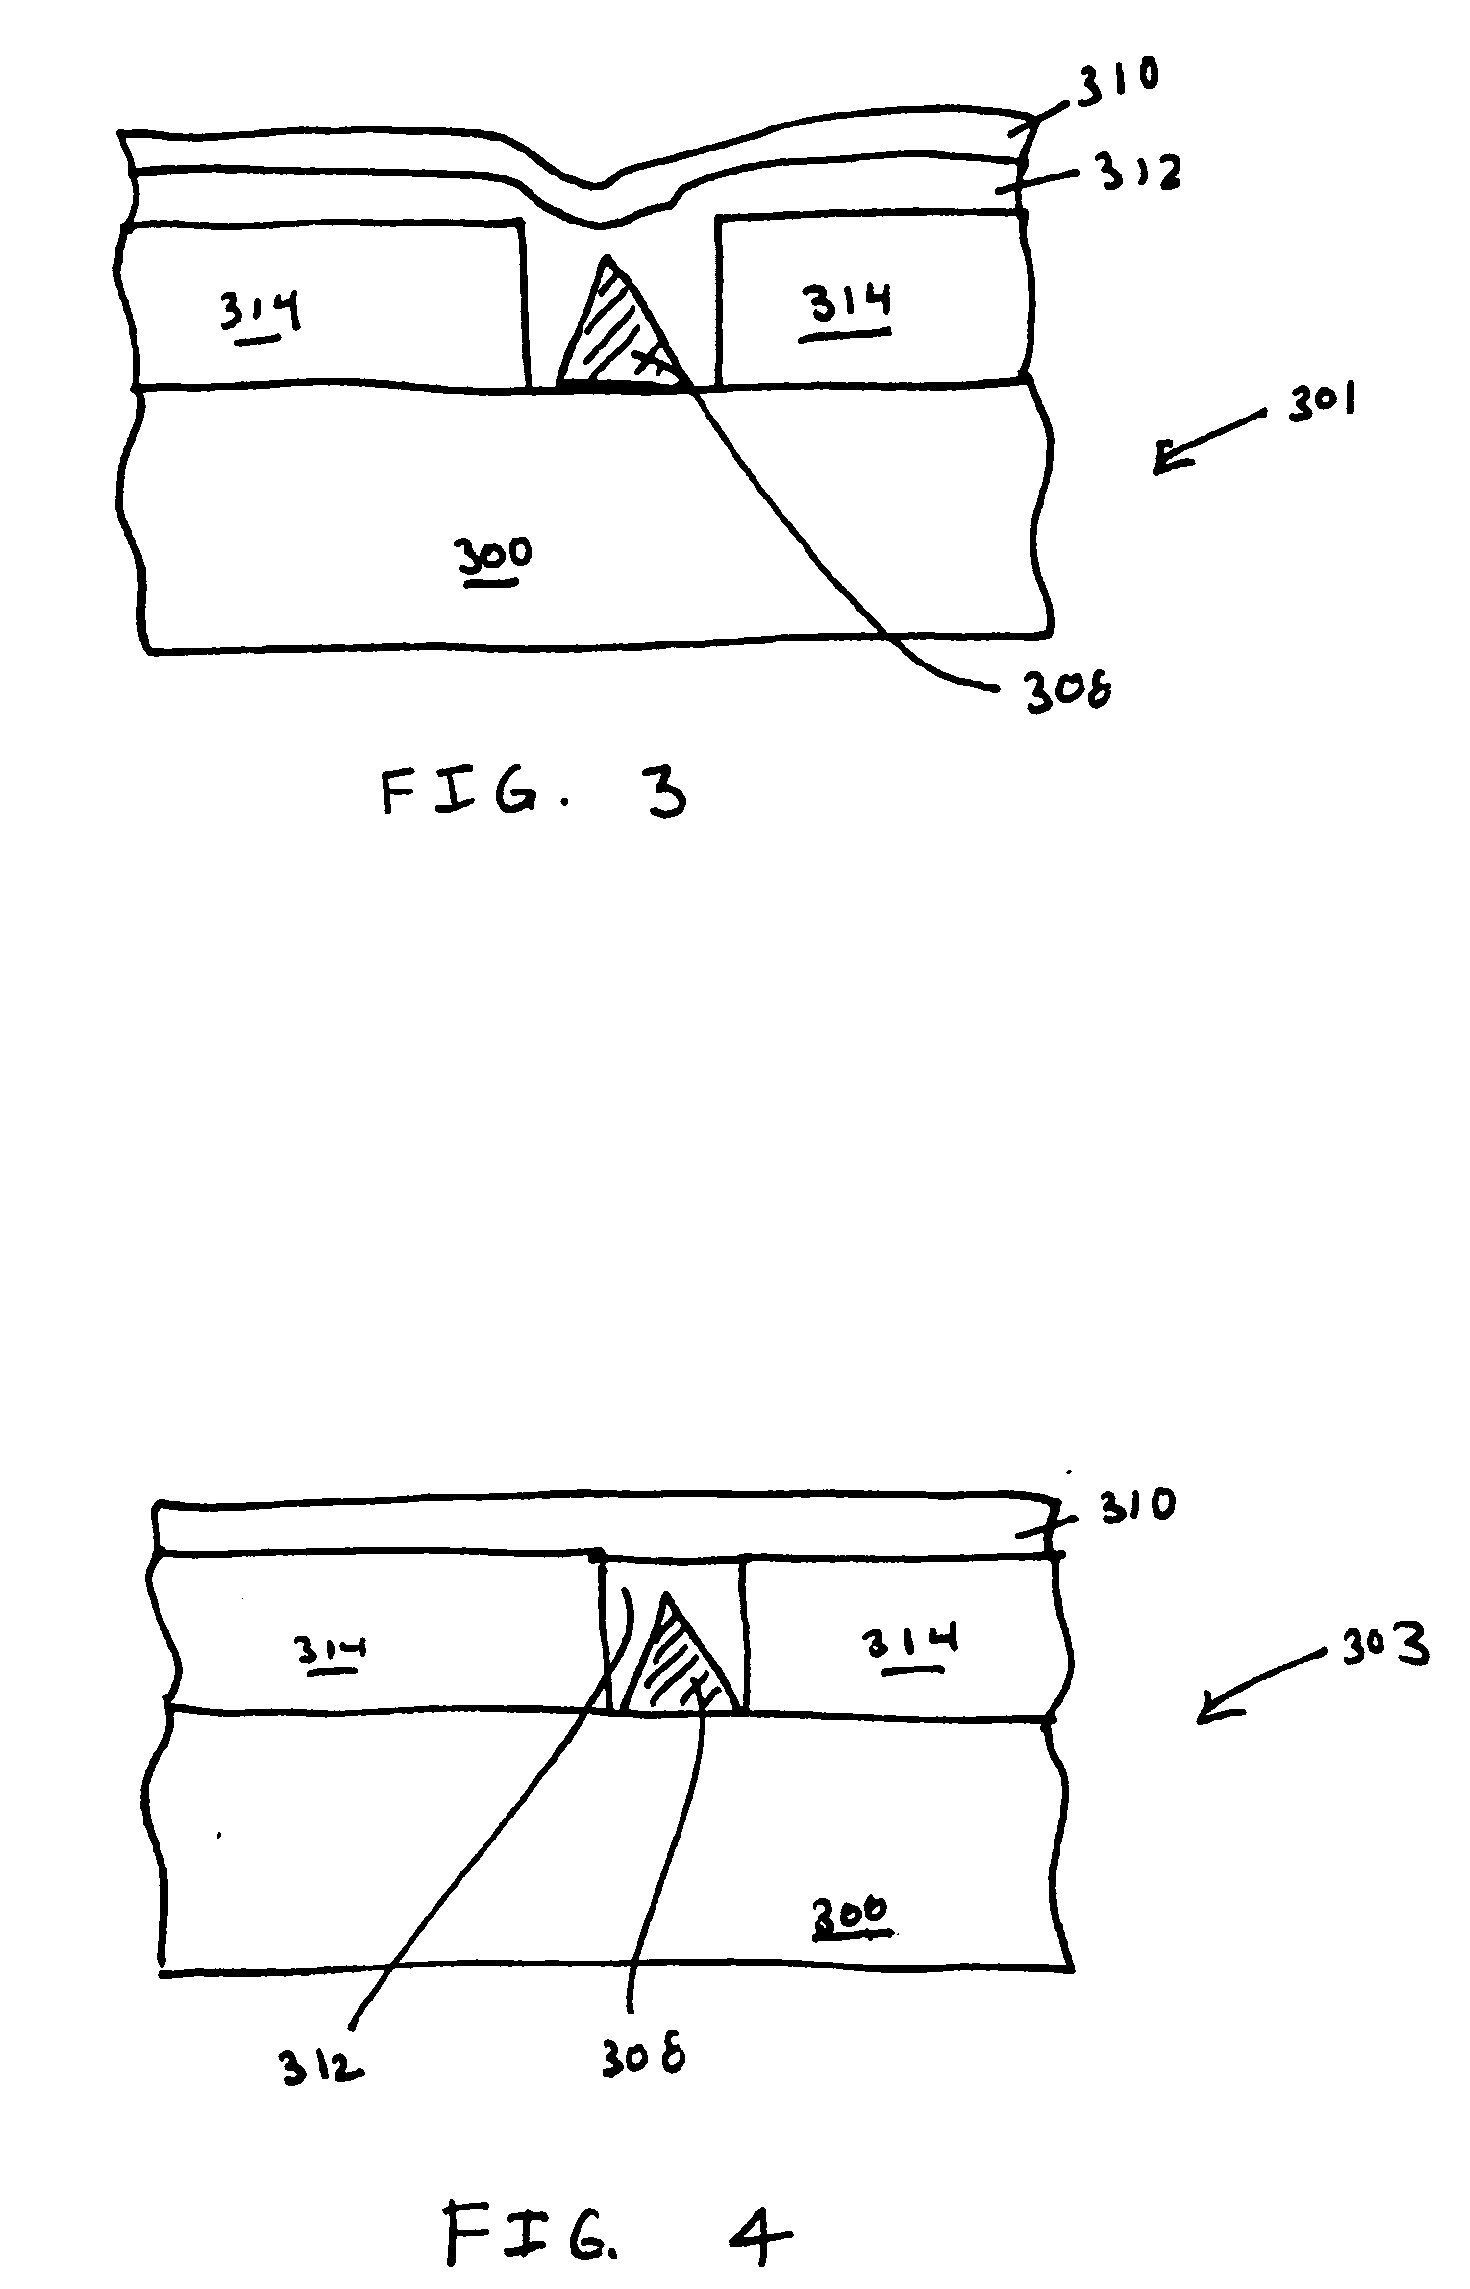 Reproducible resistance variable insulating memory devices and methods for forming same